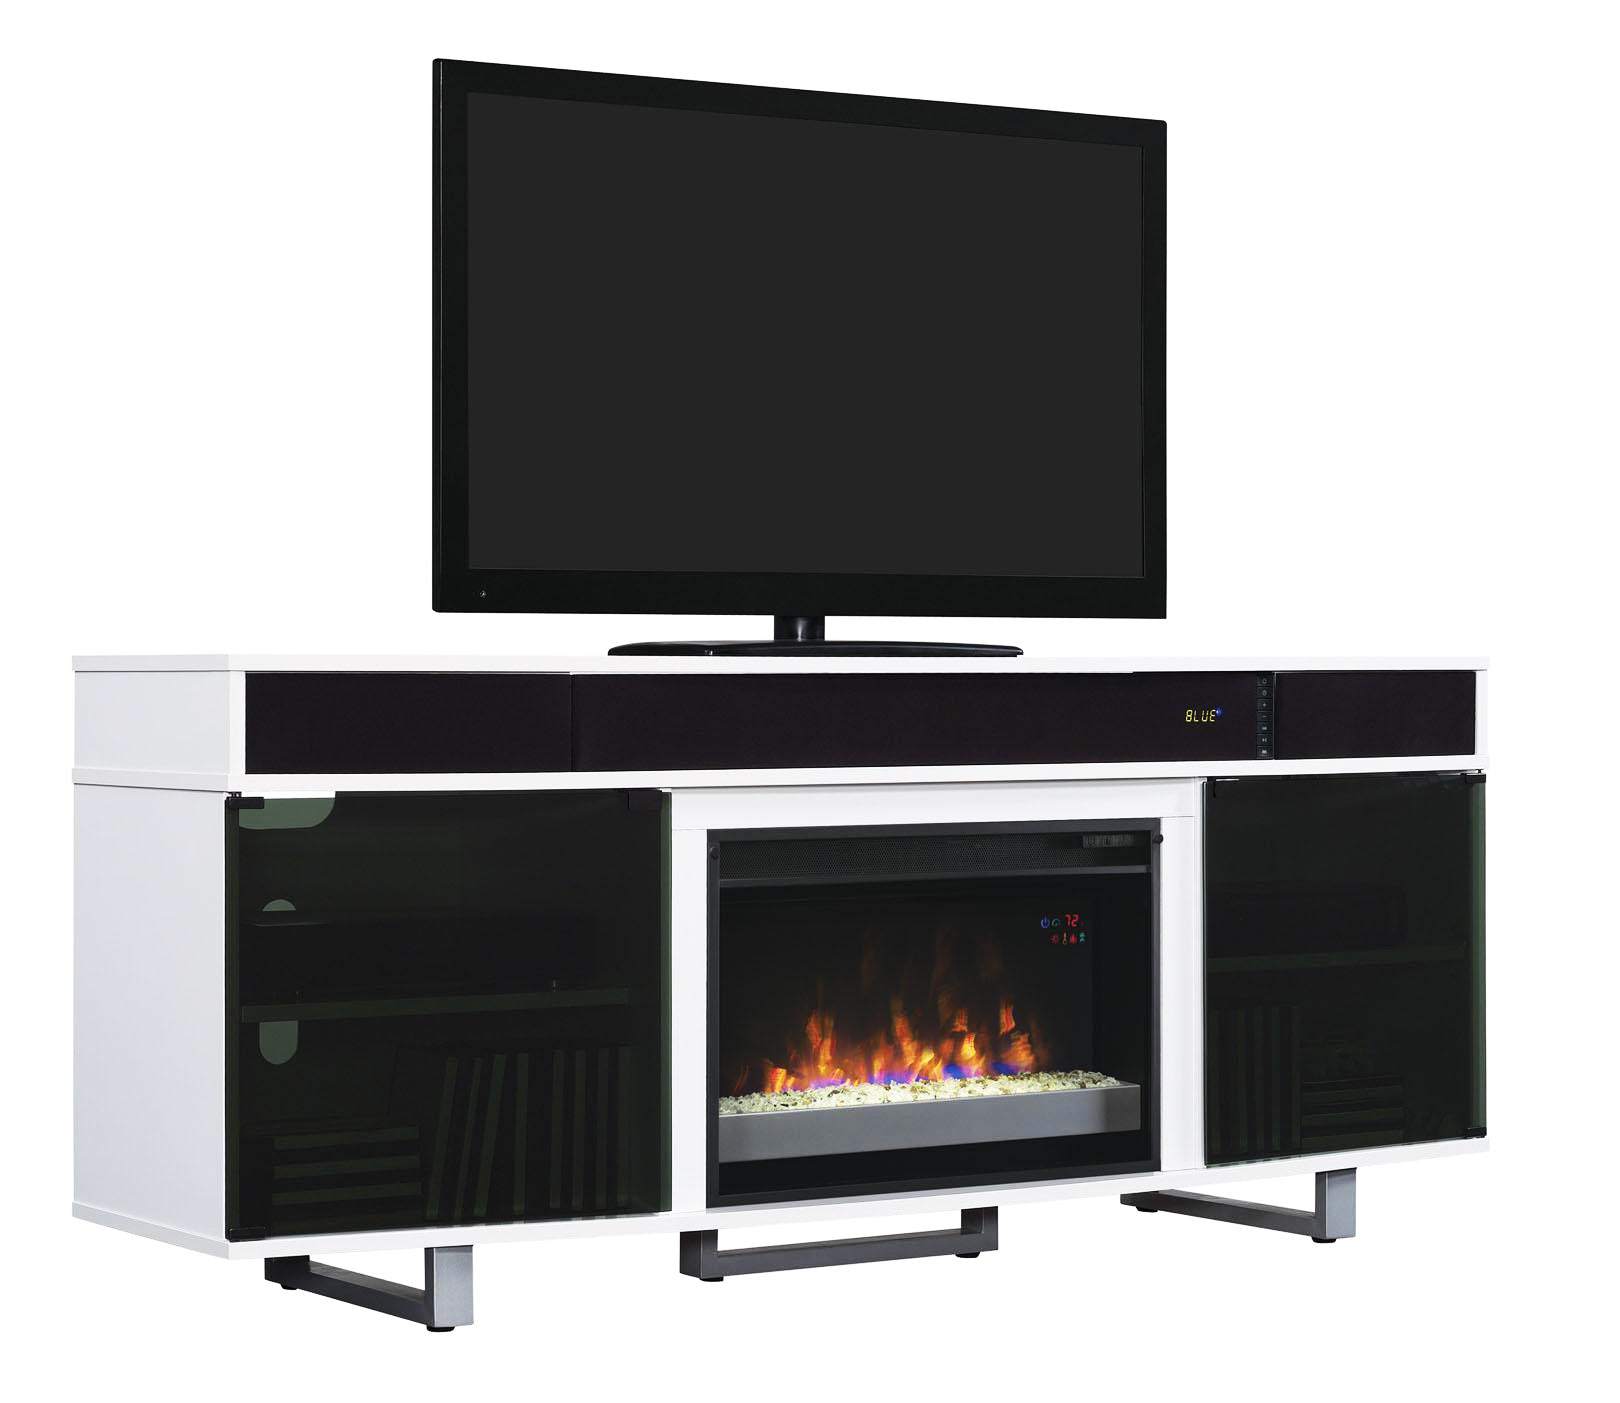 Enterprise TV Stand with Fireplace and Sound Bar - White